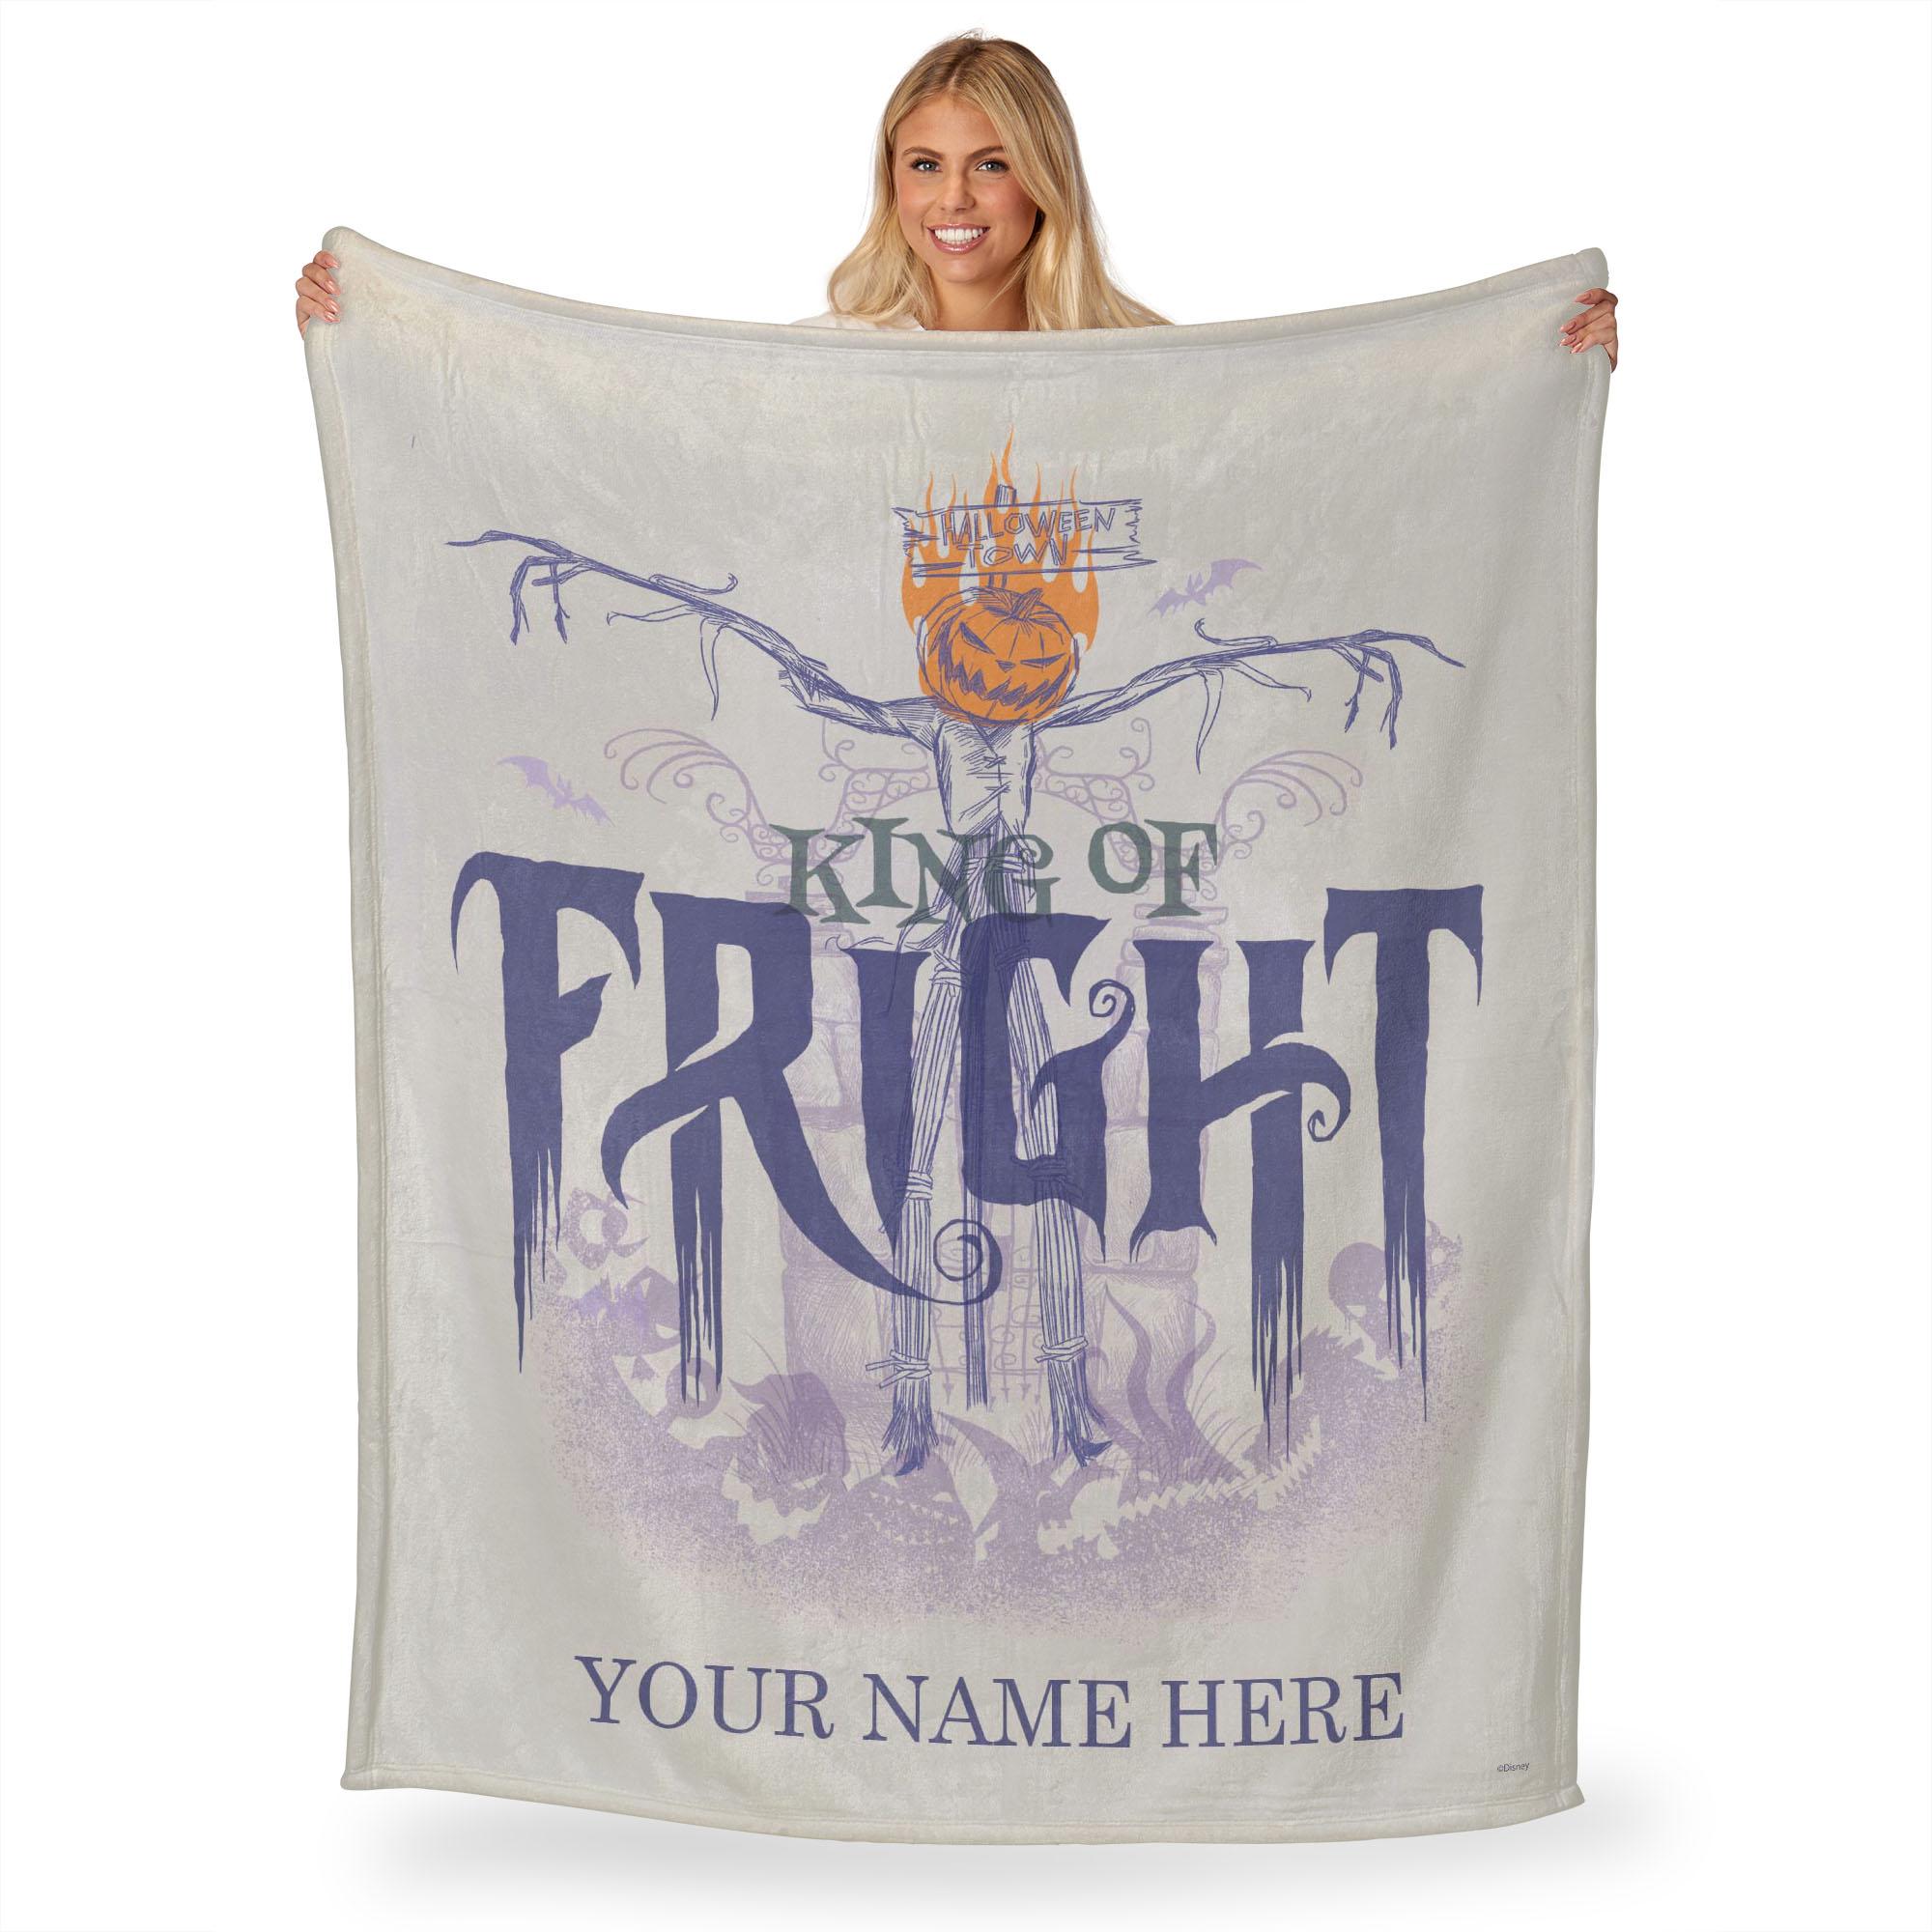 Disney Nightmare Before Christmas King of Fright Personalized Silk Touch Throw Blanket 50x60 Inches